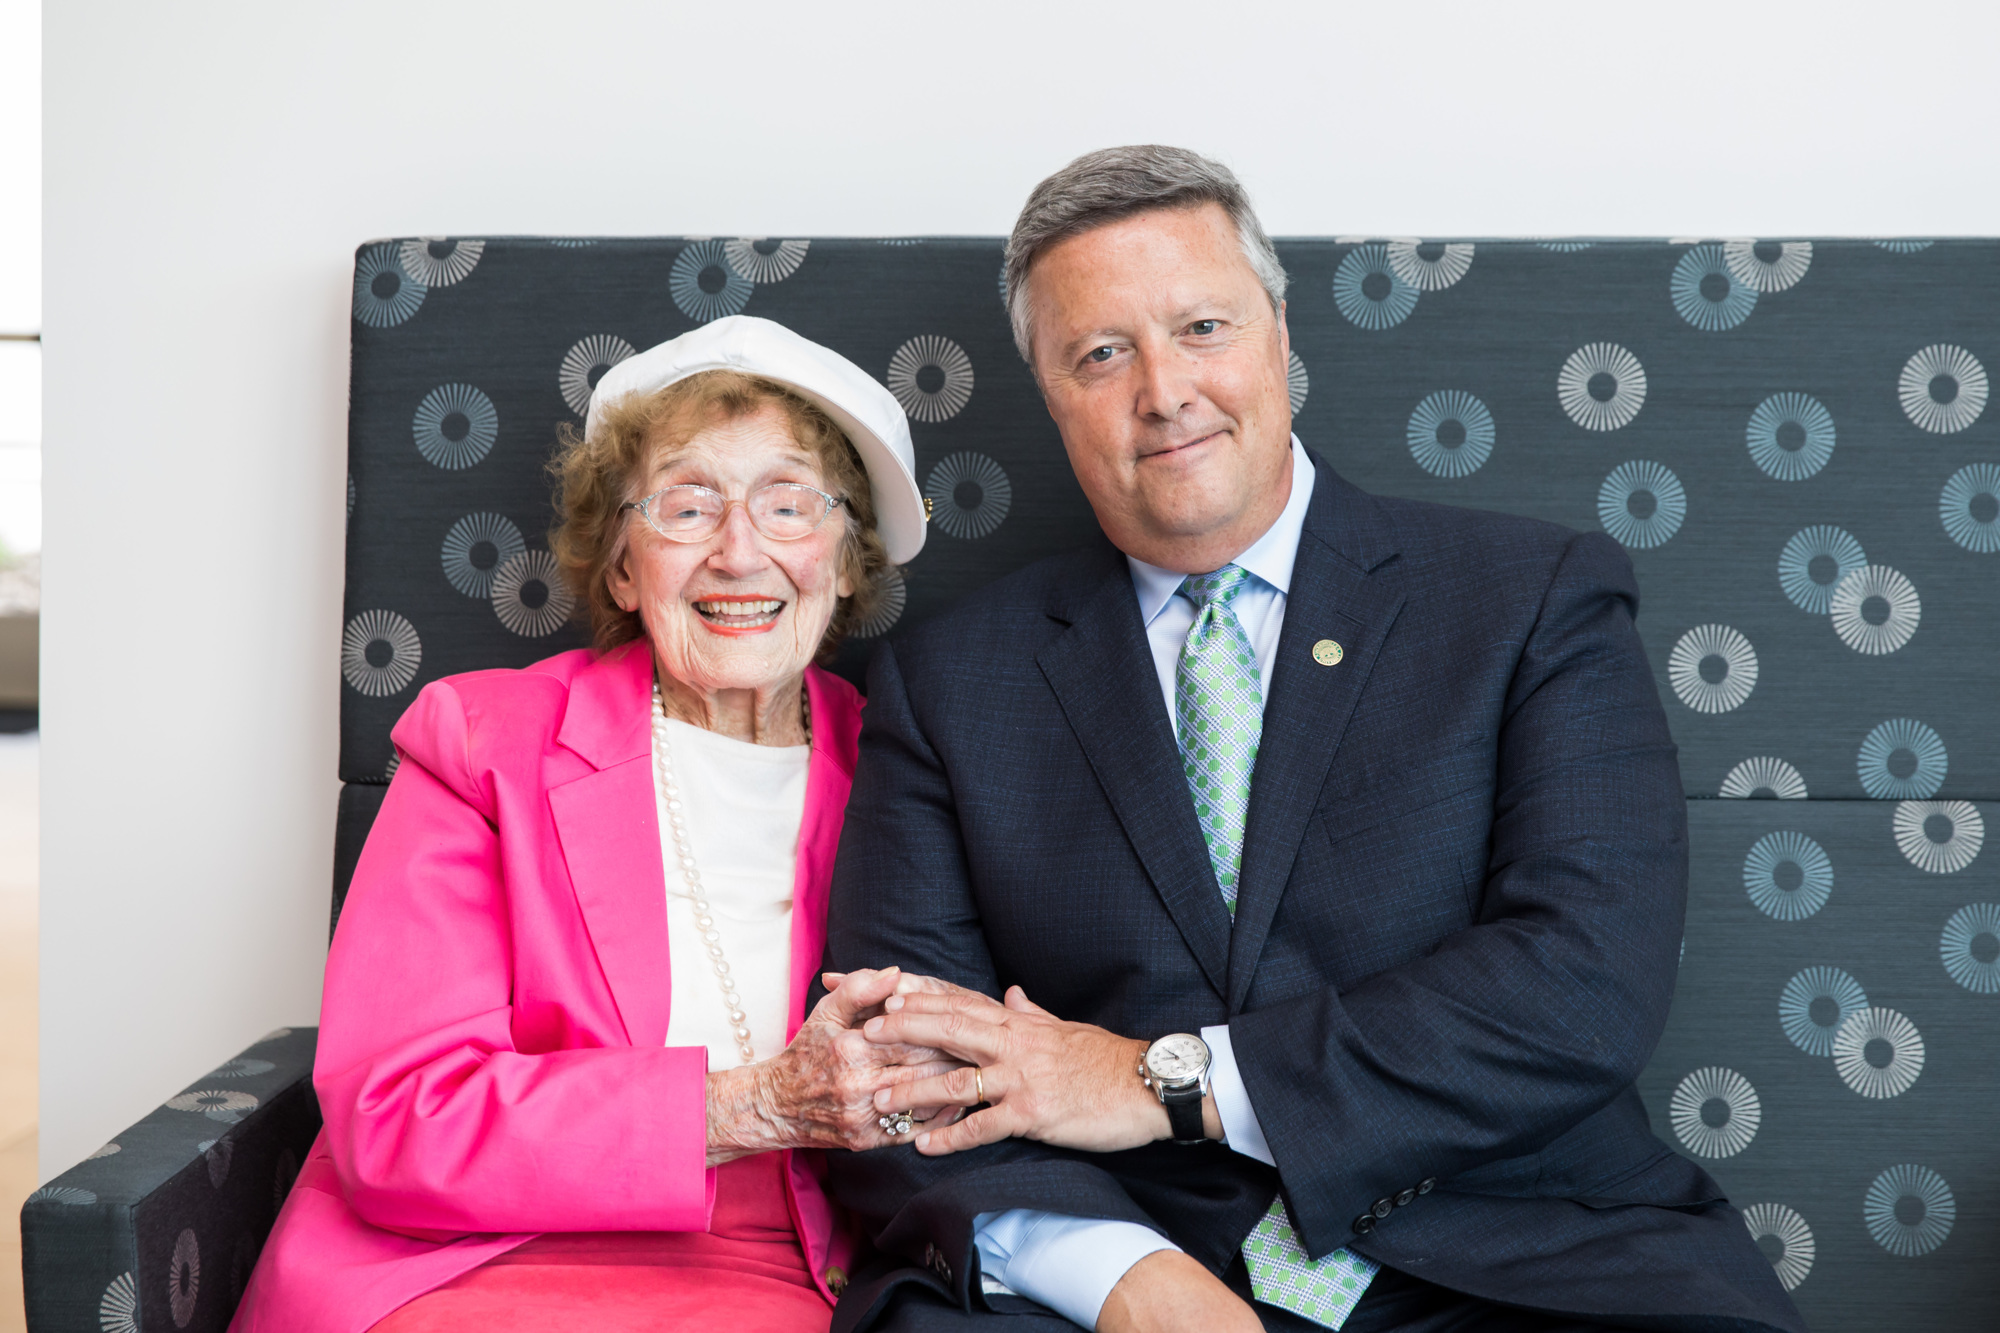 Fran Kinne and JU President Tim Cost at the Frances Bartlett Kinne Welcome Gallery in the university’s Frisch Welcome Center in 2018. Cost, a graduate of JU, was handed his diploma by Kinne in 1981.